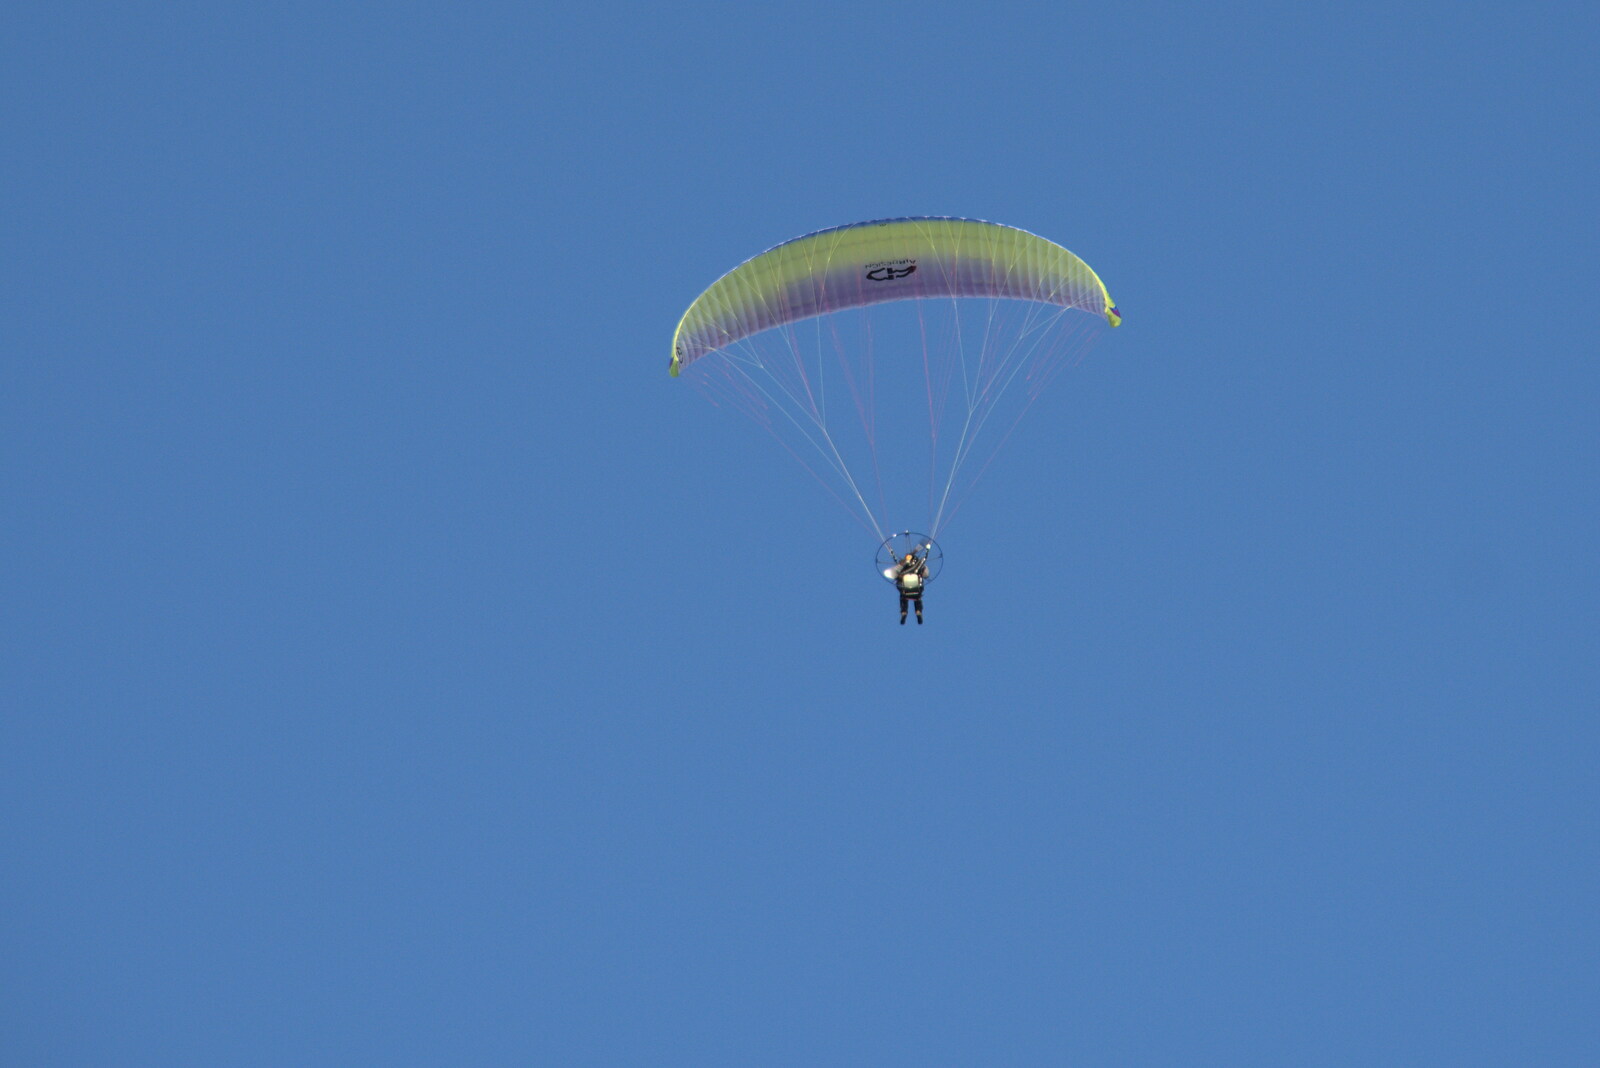 A paraglider floats overhead from Camping at Forest Park, Cromer, Norfolk - 12th August 2022